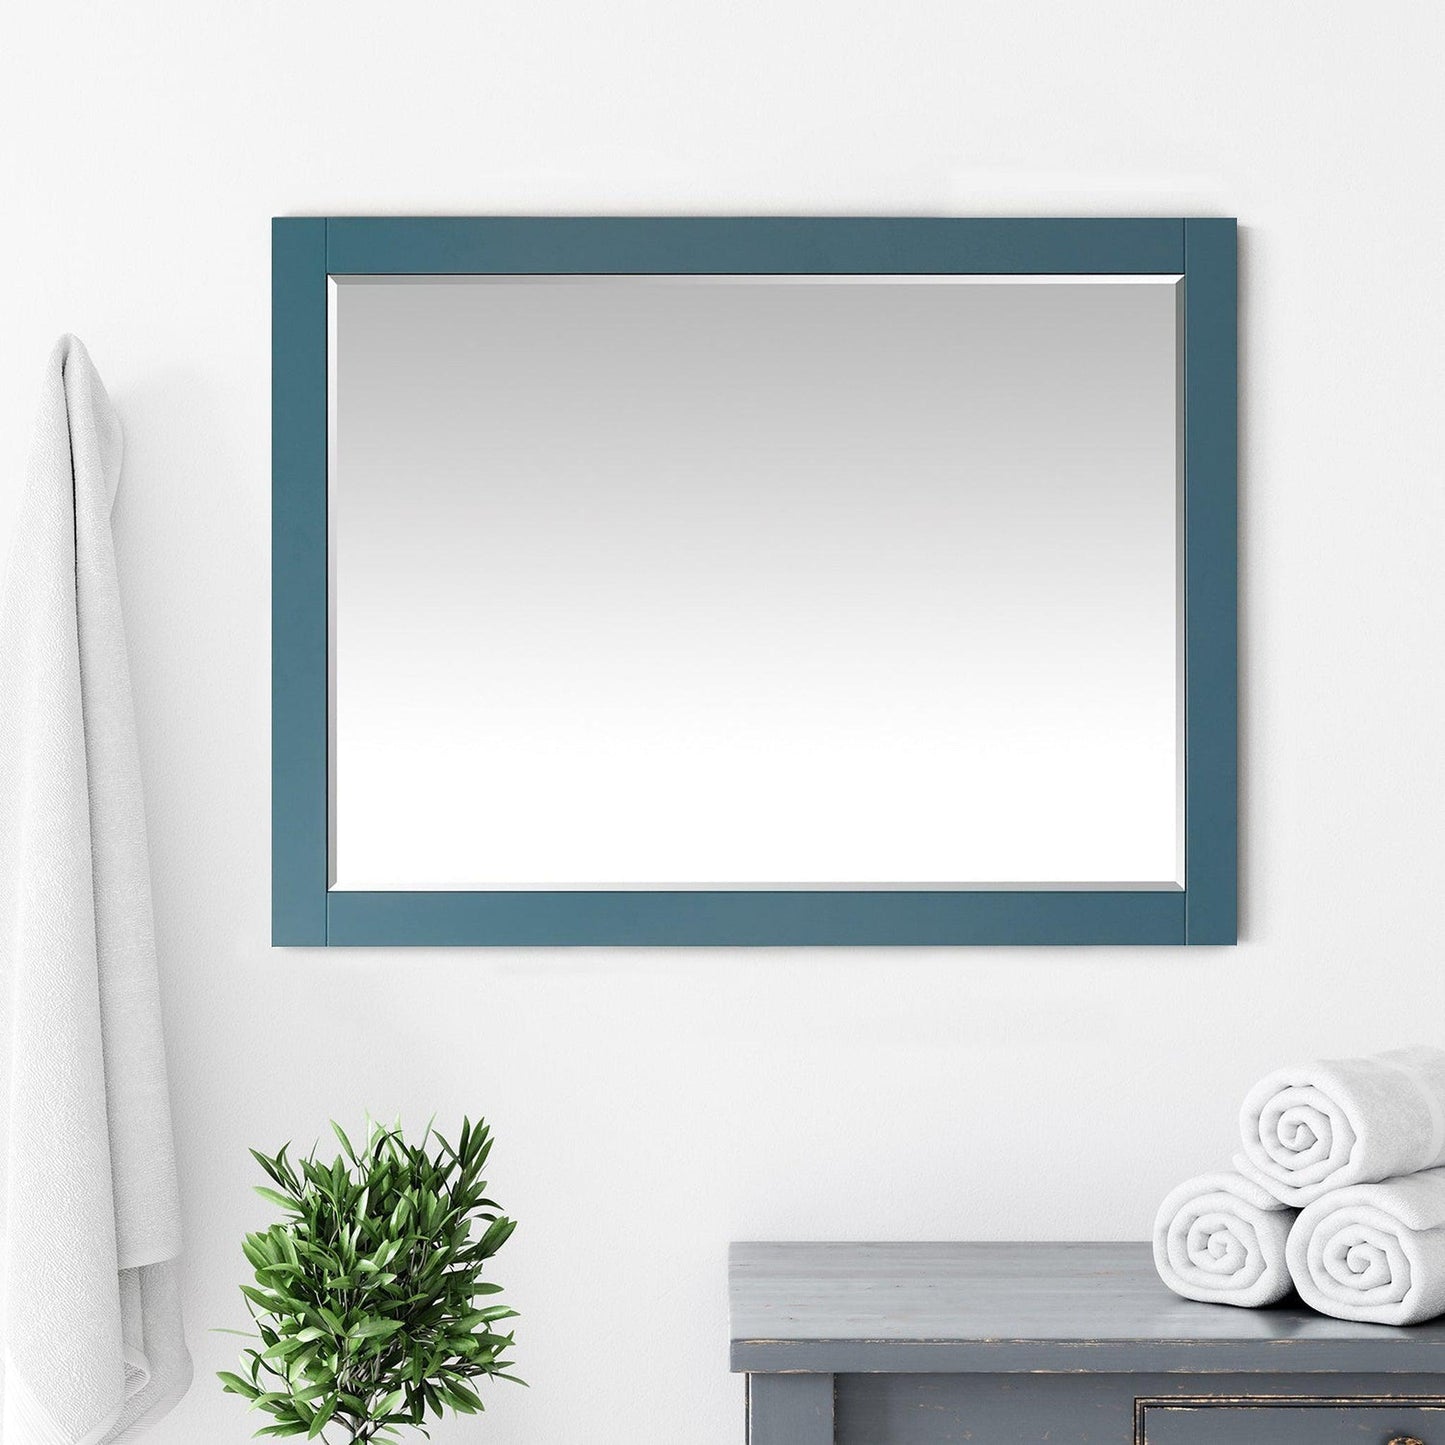 Altair Sutton 48" x 36" Rectangle Royal Green Wood Framed Wall-Mounted Mirror